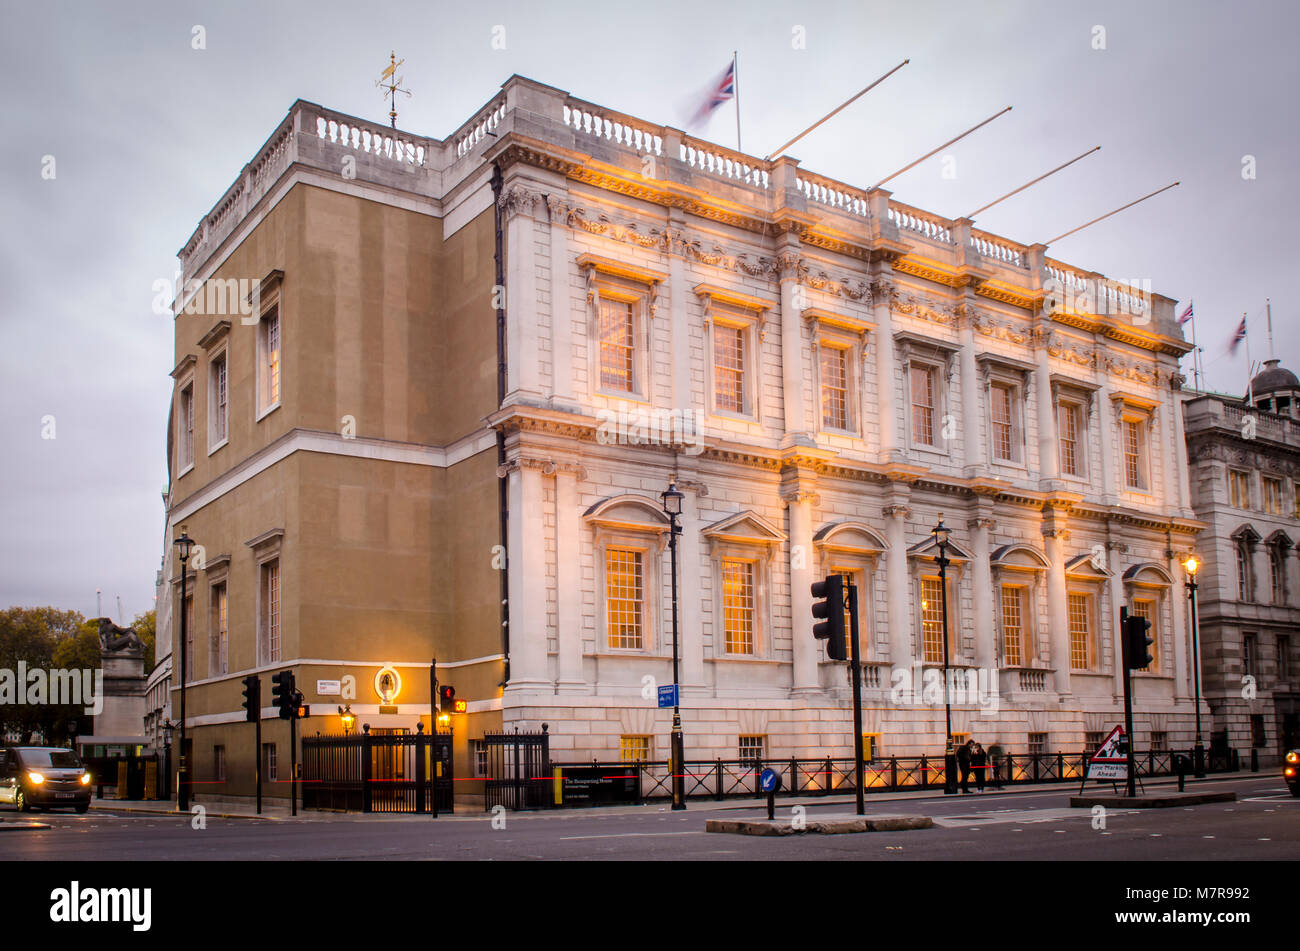 Banqueting House, Royal Palace of Westminster, London Stockfoto